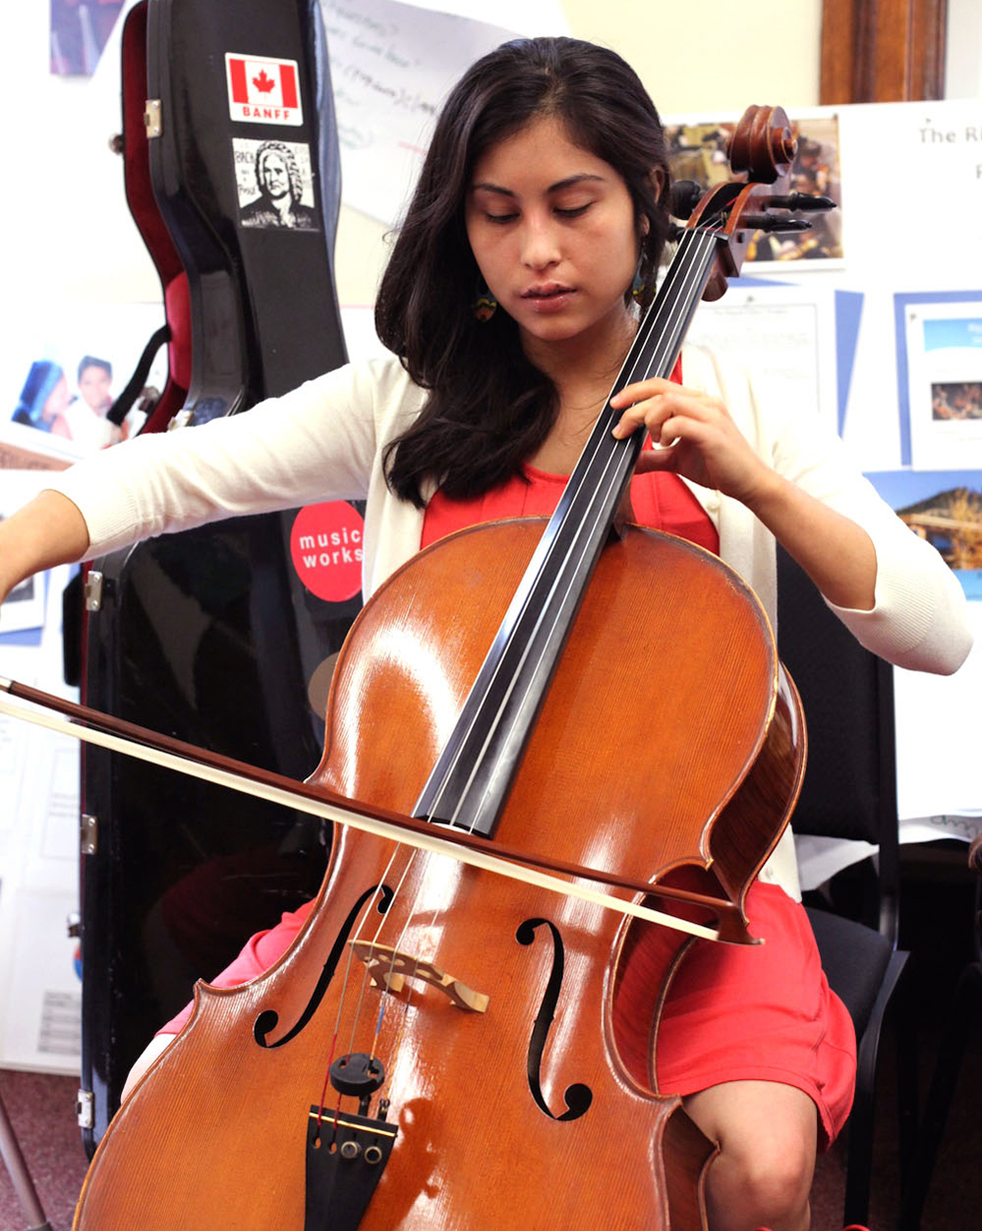 Andrea Landin doesn't just play beautiful music. A graduate of the Sistema Fellows US Program, she got the training she needed to teach children how music can change communities. Photo: Natasha Scripture